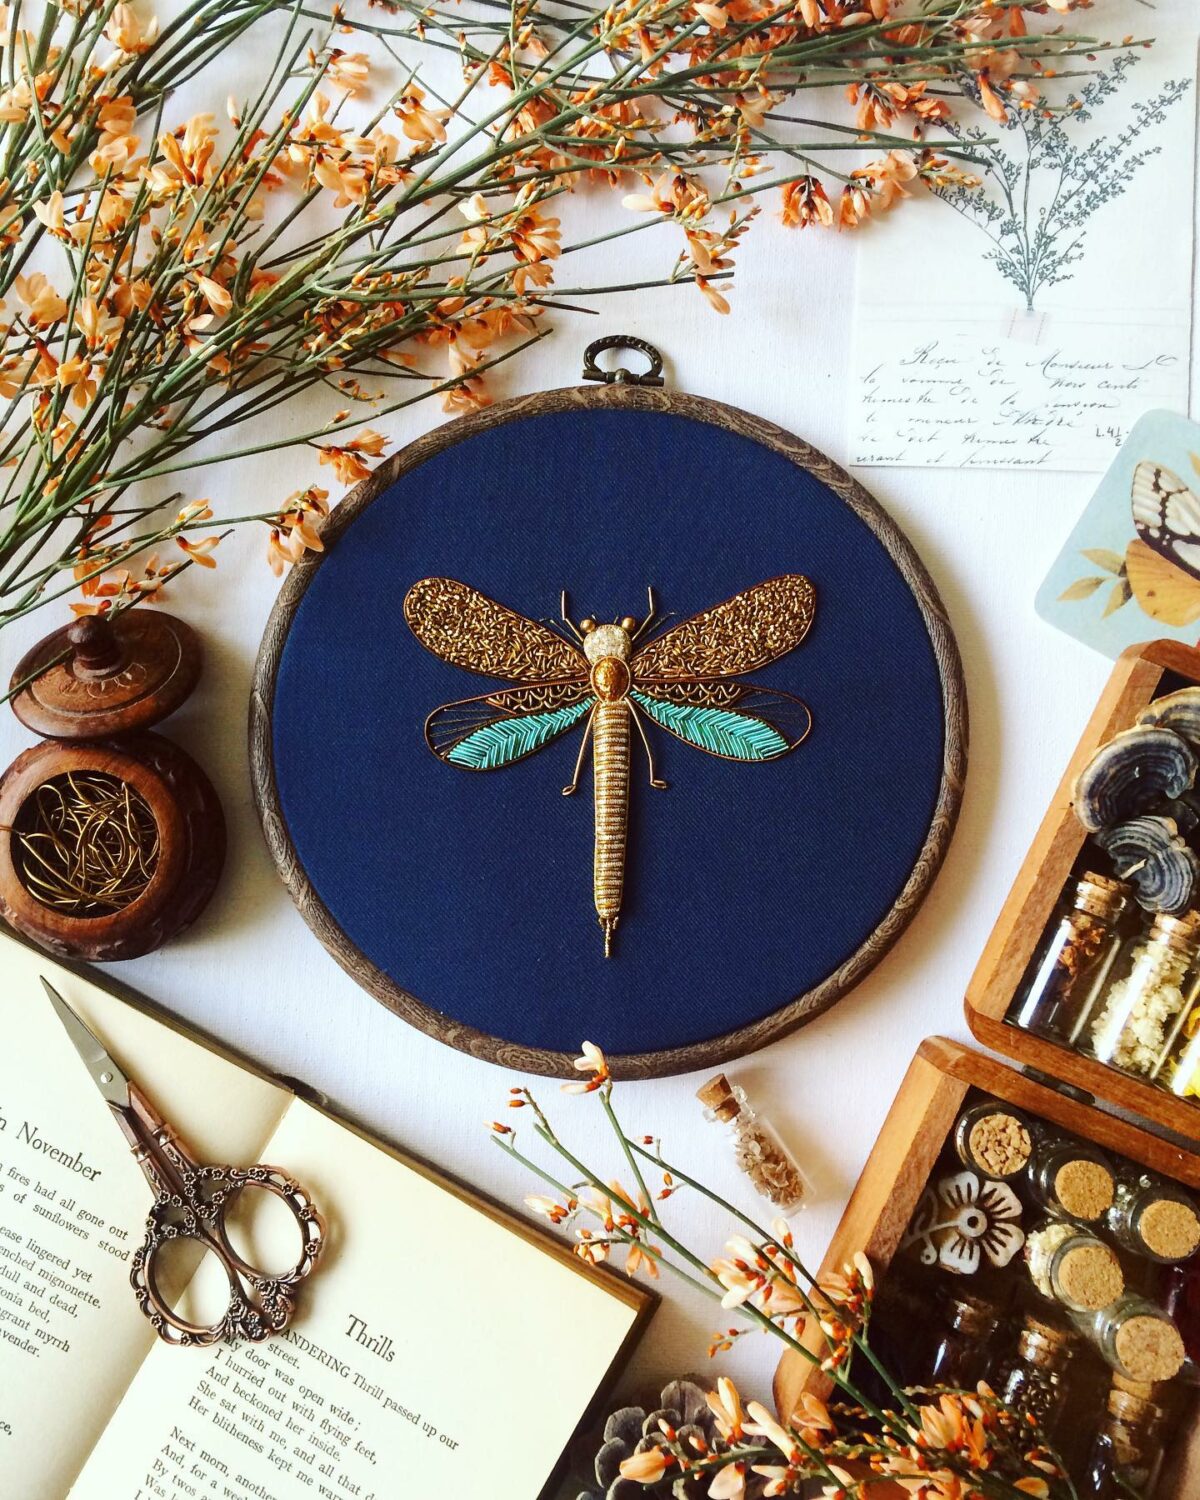 Beautiful Bird And Insect Embroideries Decorated With Metallic Beads By Humayrah Bint Altaf 12